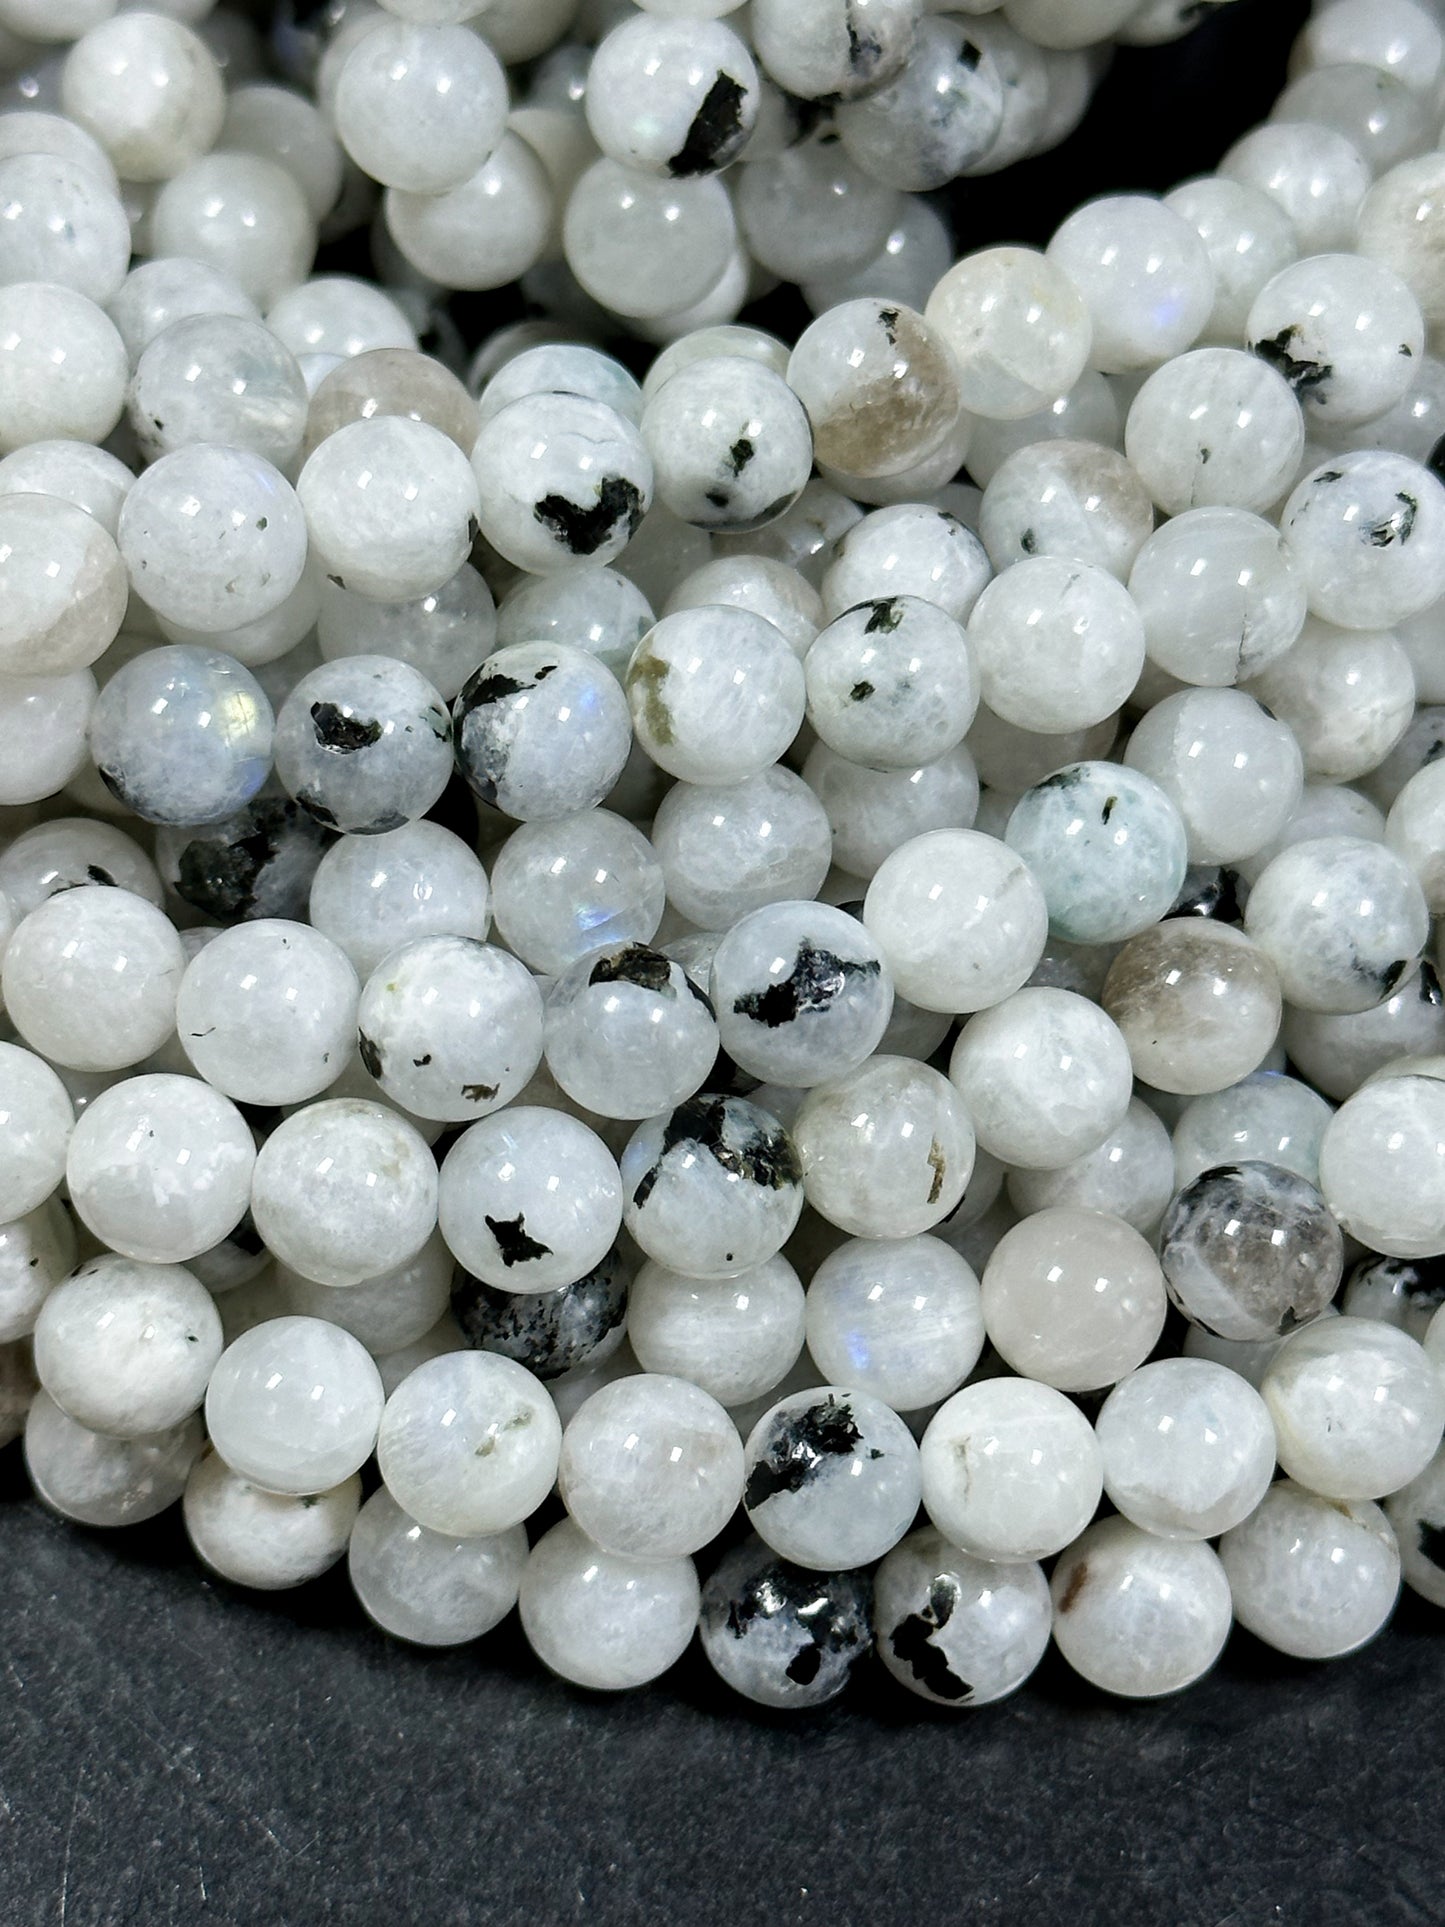 NATURAL Moonstone Gemstone Bead 6mm 8mm 10mm Round Bead, Beautiful Natural White Color with Black Specks Moonstone Gemstone Bead Full Strand